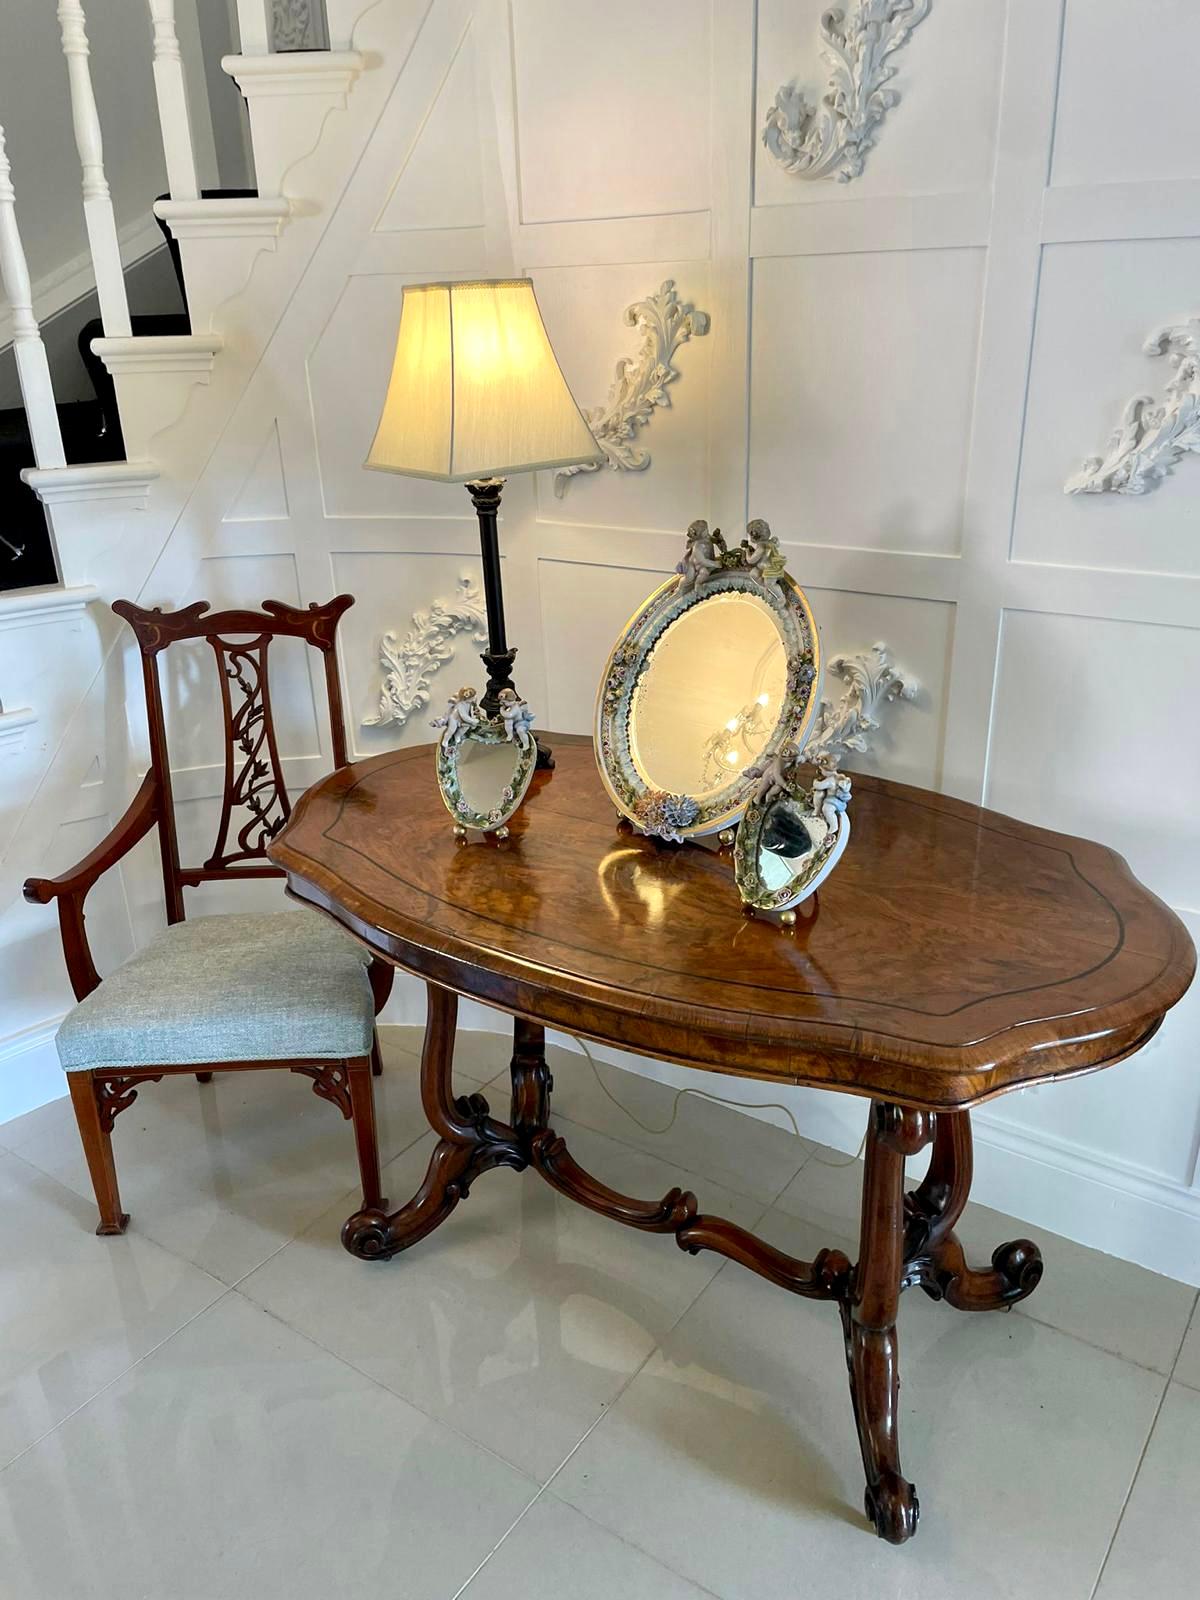 Large antique continental porcelain easel mirror with an oval mirror plate and foliate decorated edge surmounted by two cherubs. 

This is a charming piece in beautiful original condition.

The pair of porcelain heart shaped mirrors shown with